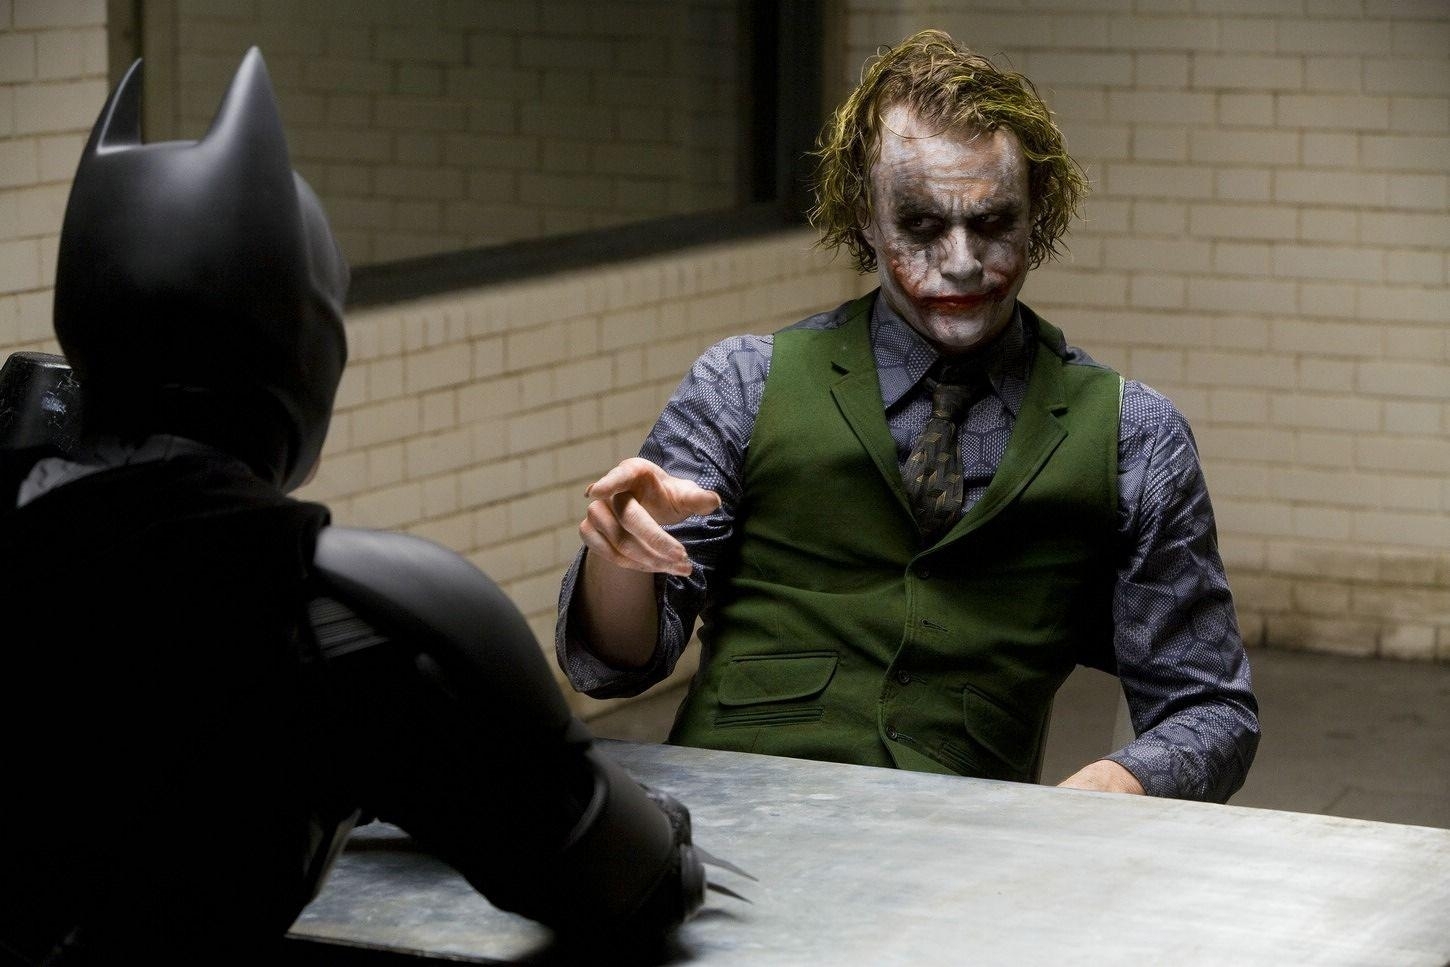 10 New Joker Dark Knight Pictures FULL HD 1080p For PC Background